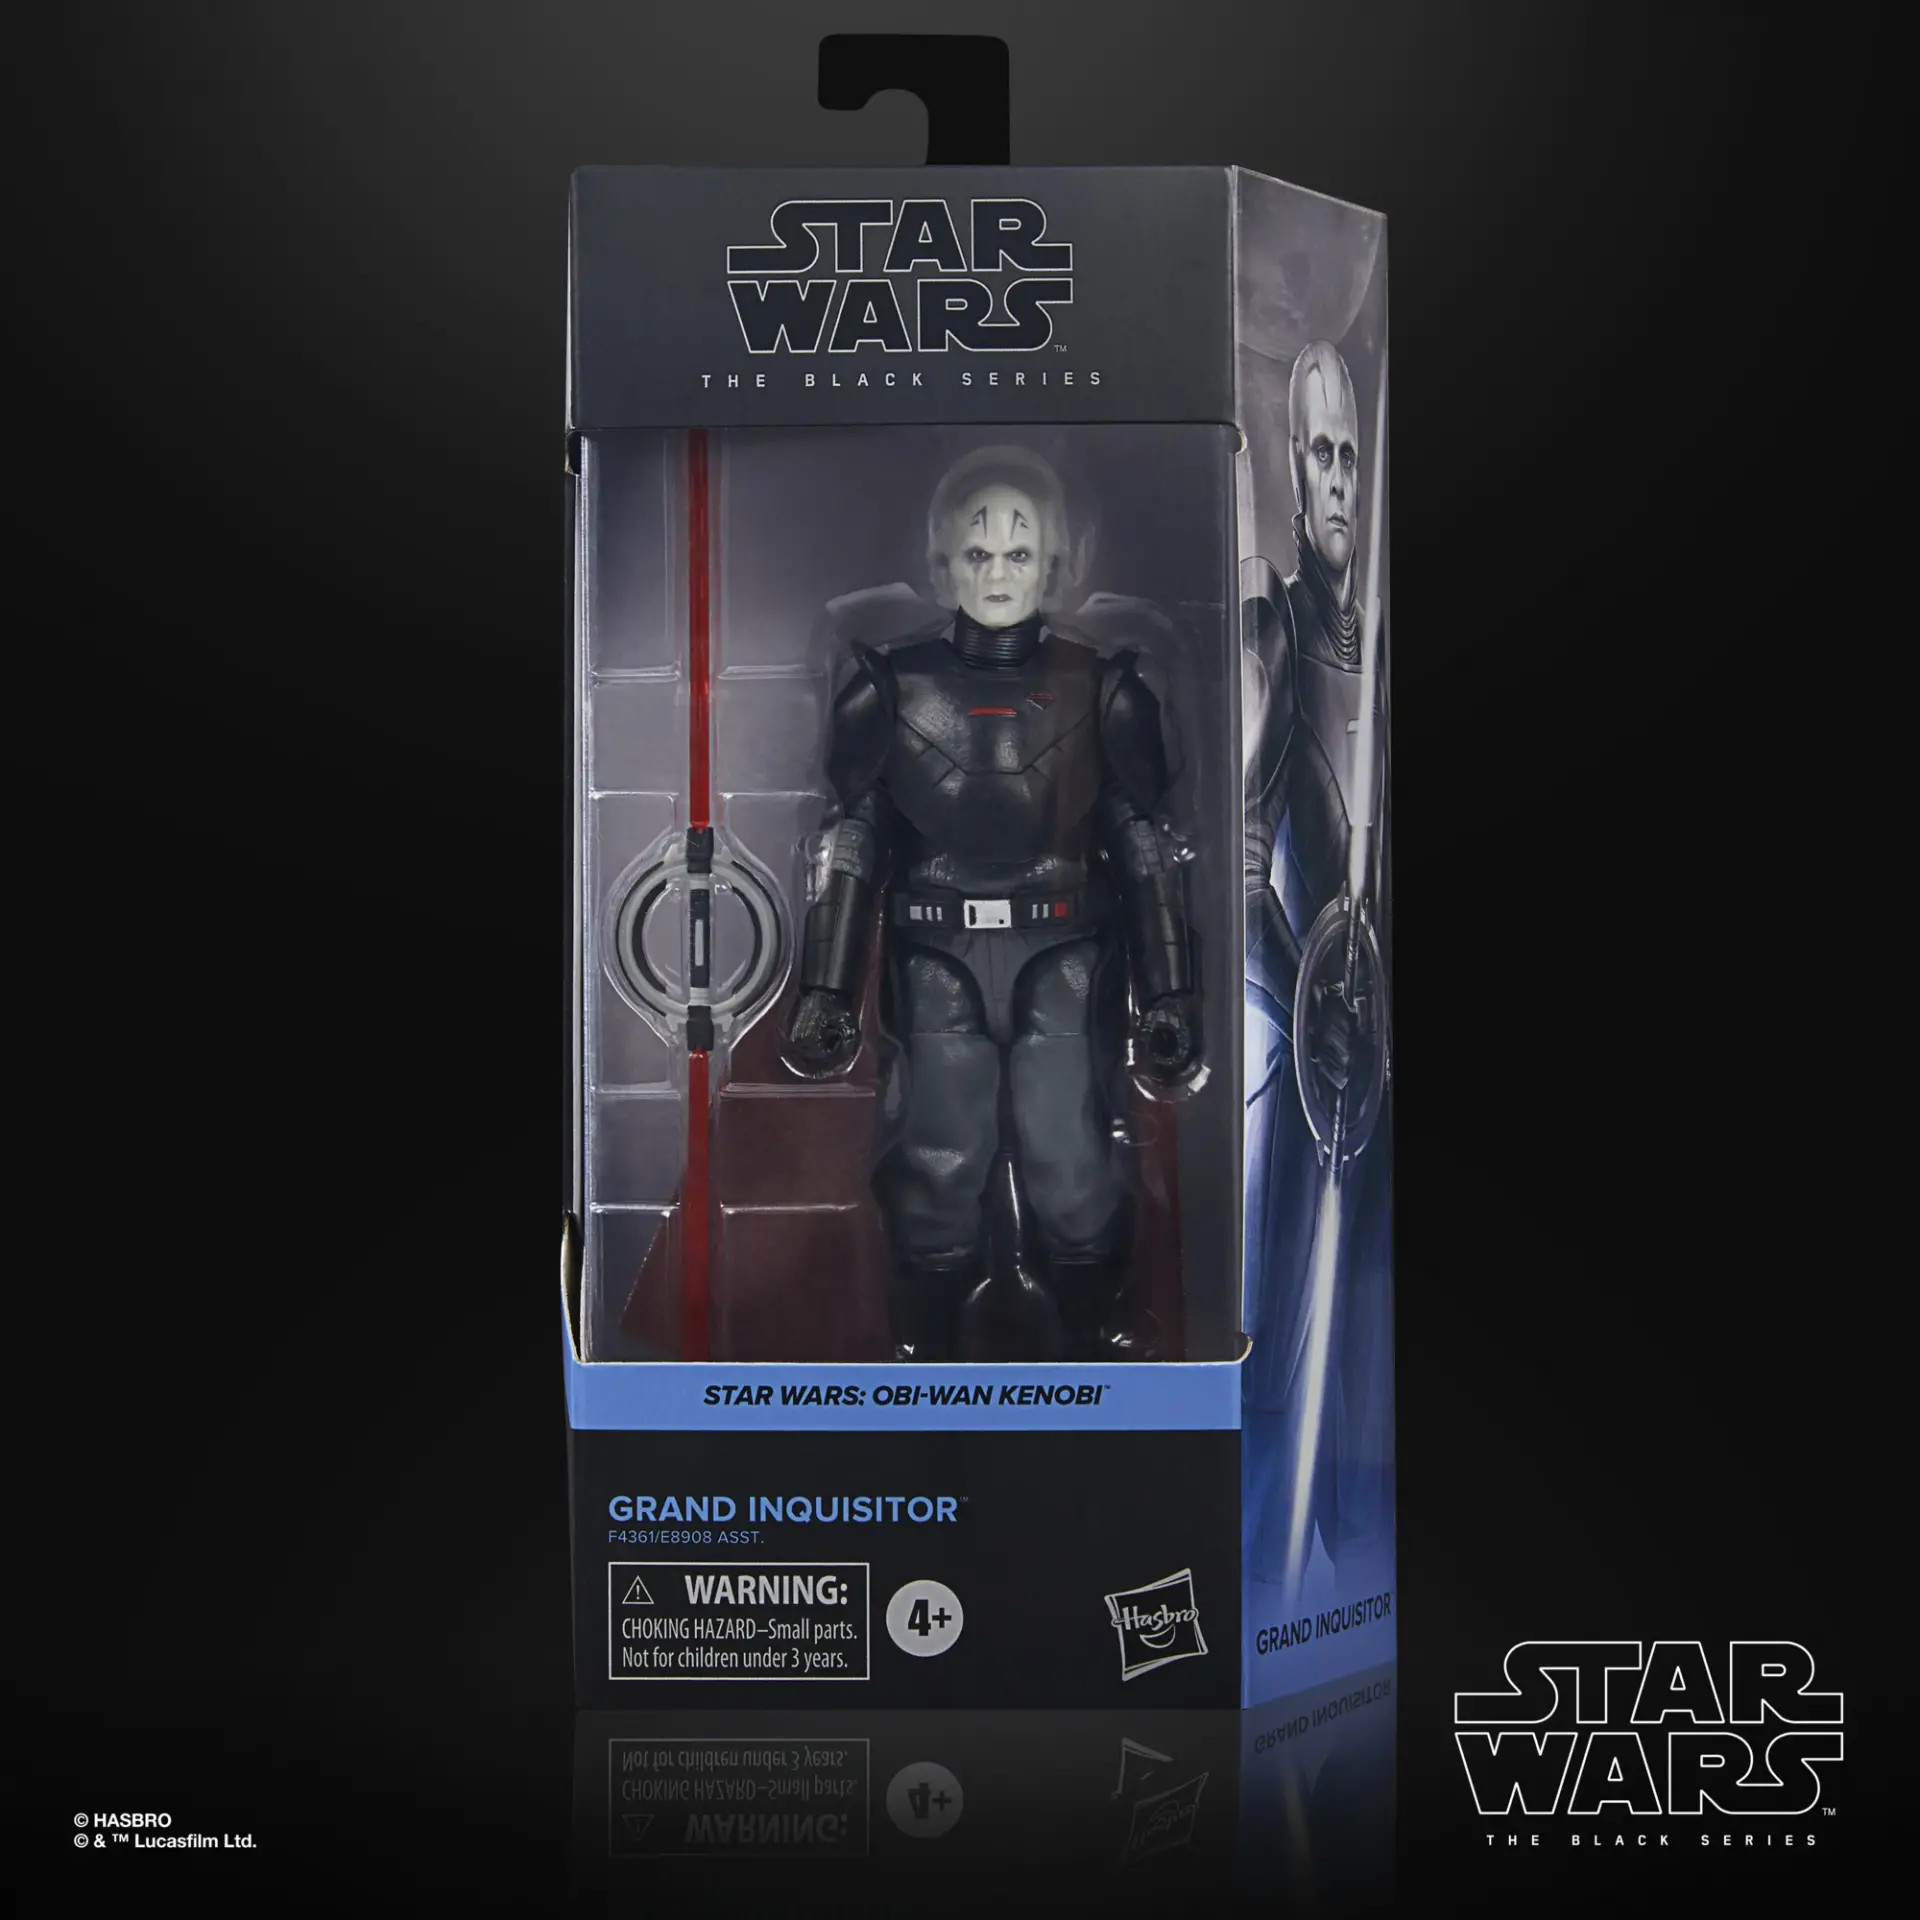 Star wars the black series grand inquisitor jawascave 3